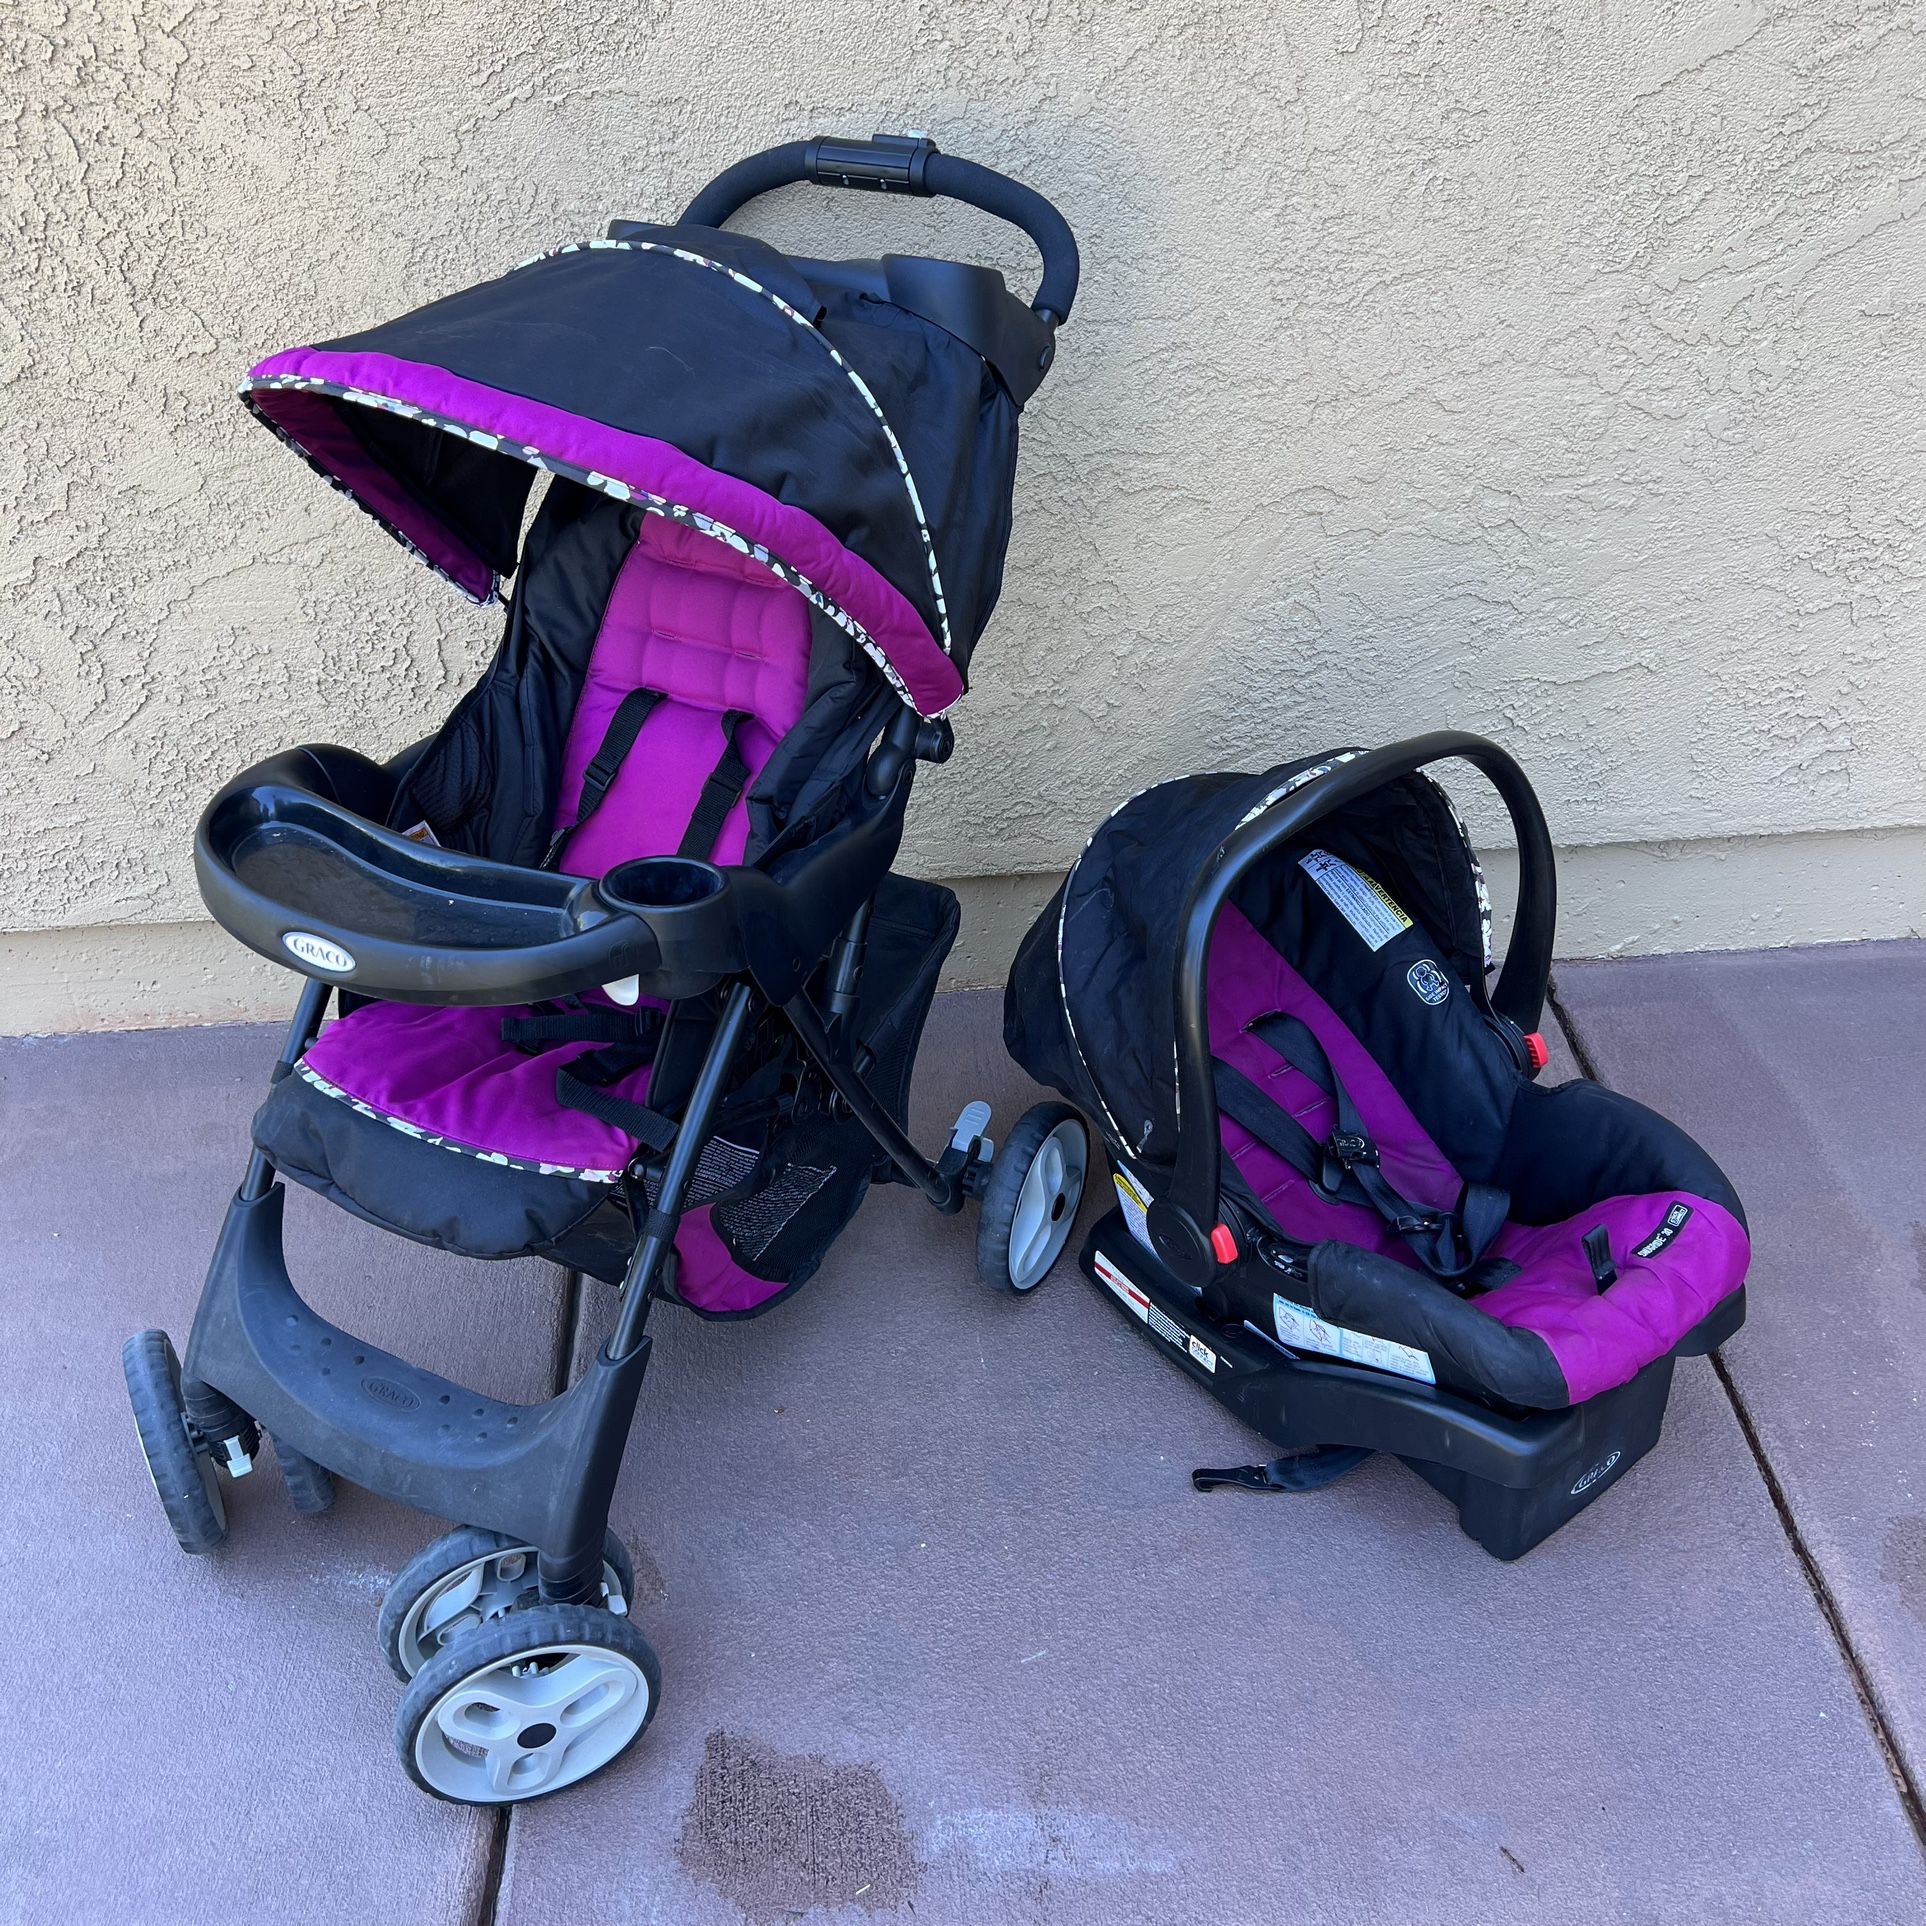 Graco Snugride 30 Infant Car Seat And Stroller $70 OBO